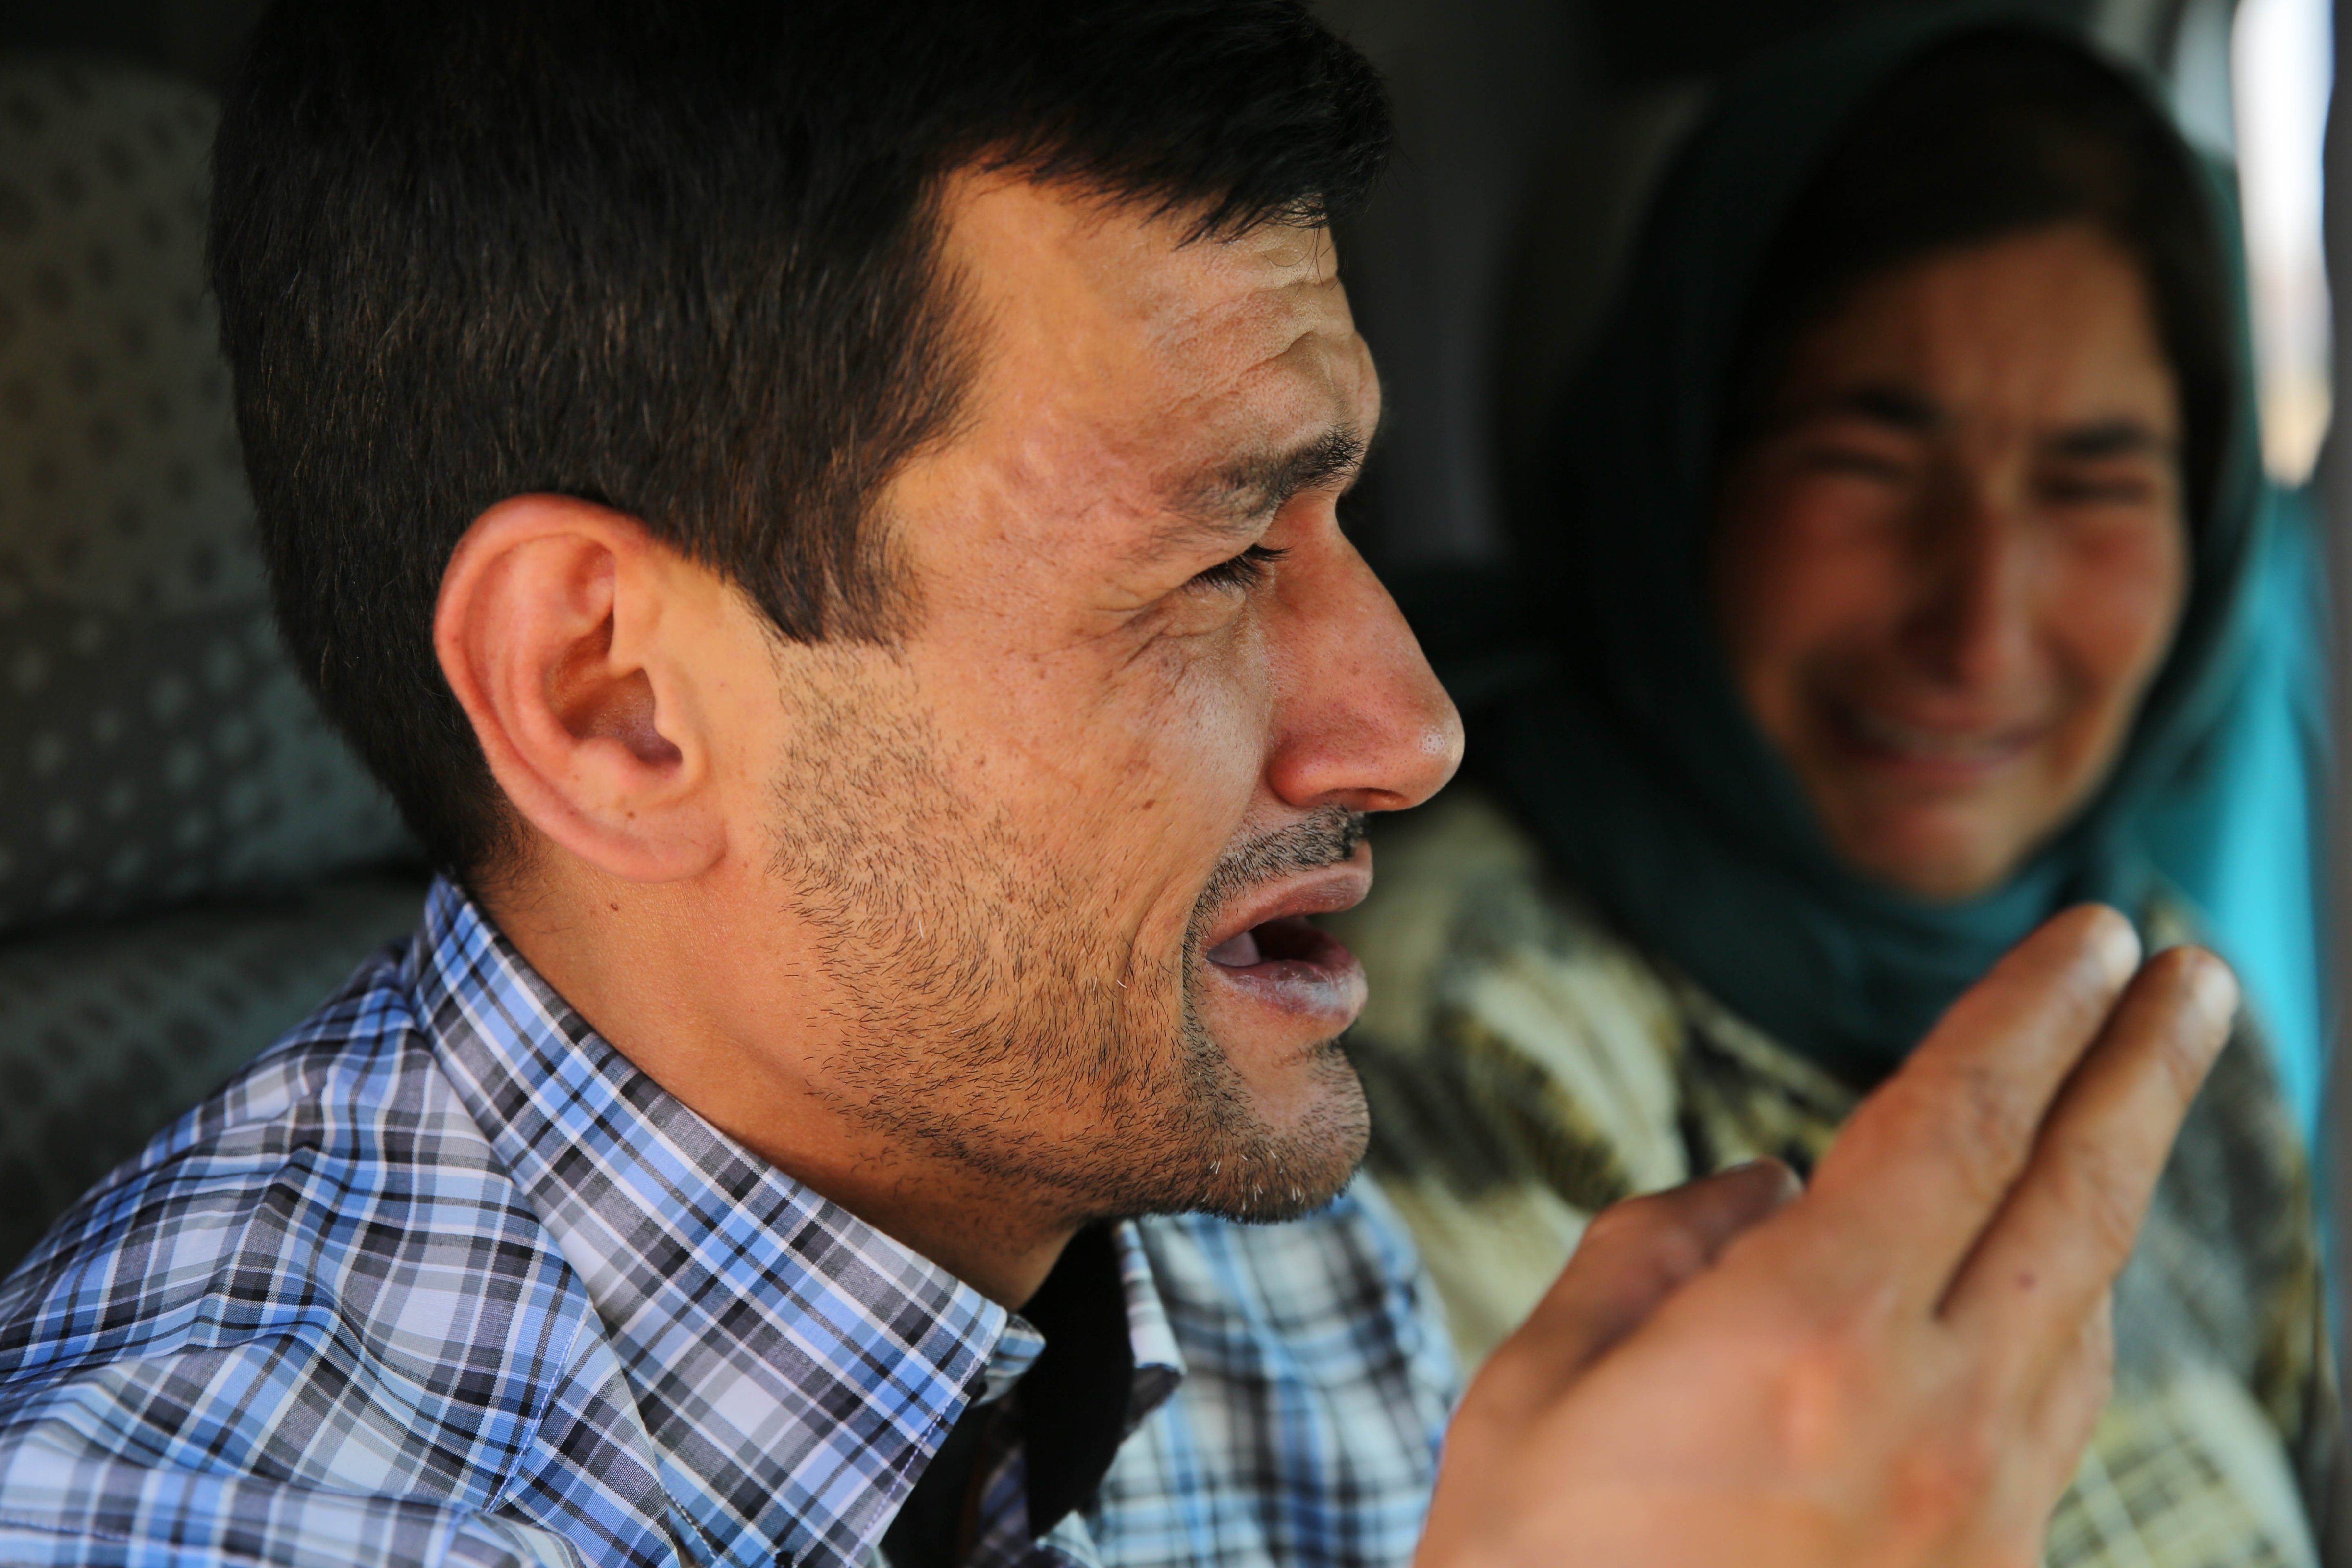 Abdullah Kurdi, father of Syrian children Aylan, 2, his brother Galip, 3, and husband of Zahin Kurdi, 27, who drowned after their boat sank en route to the Greek islands in the Aegean Sea, cries on his way to the Syrian border town of Kobani (Ayn al-Arab) to hold funeral of his family on September 4, 2015. The 12 people, including eight children, drowned after their boat sank en route to the Greek islands in the Aegean Sea. (Anadolu Agency—Getty Images)